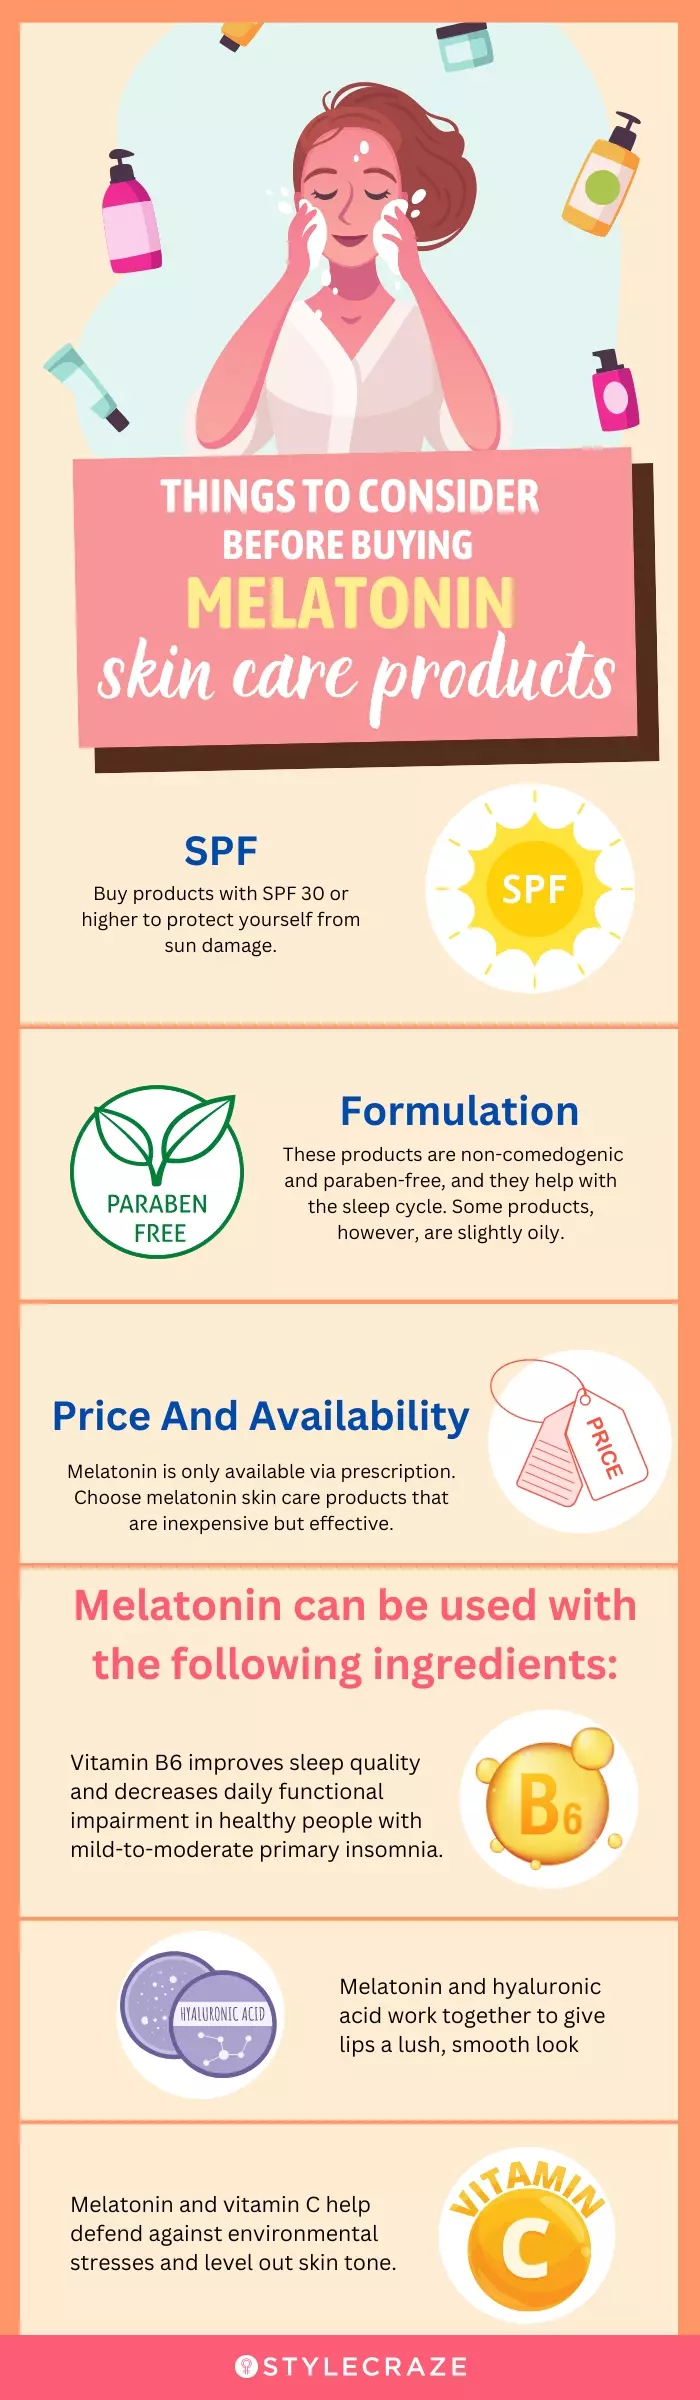 Things To Consider Before Buying Melatonin Skin Care Products (infographic)